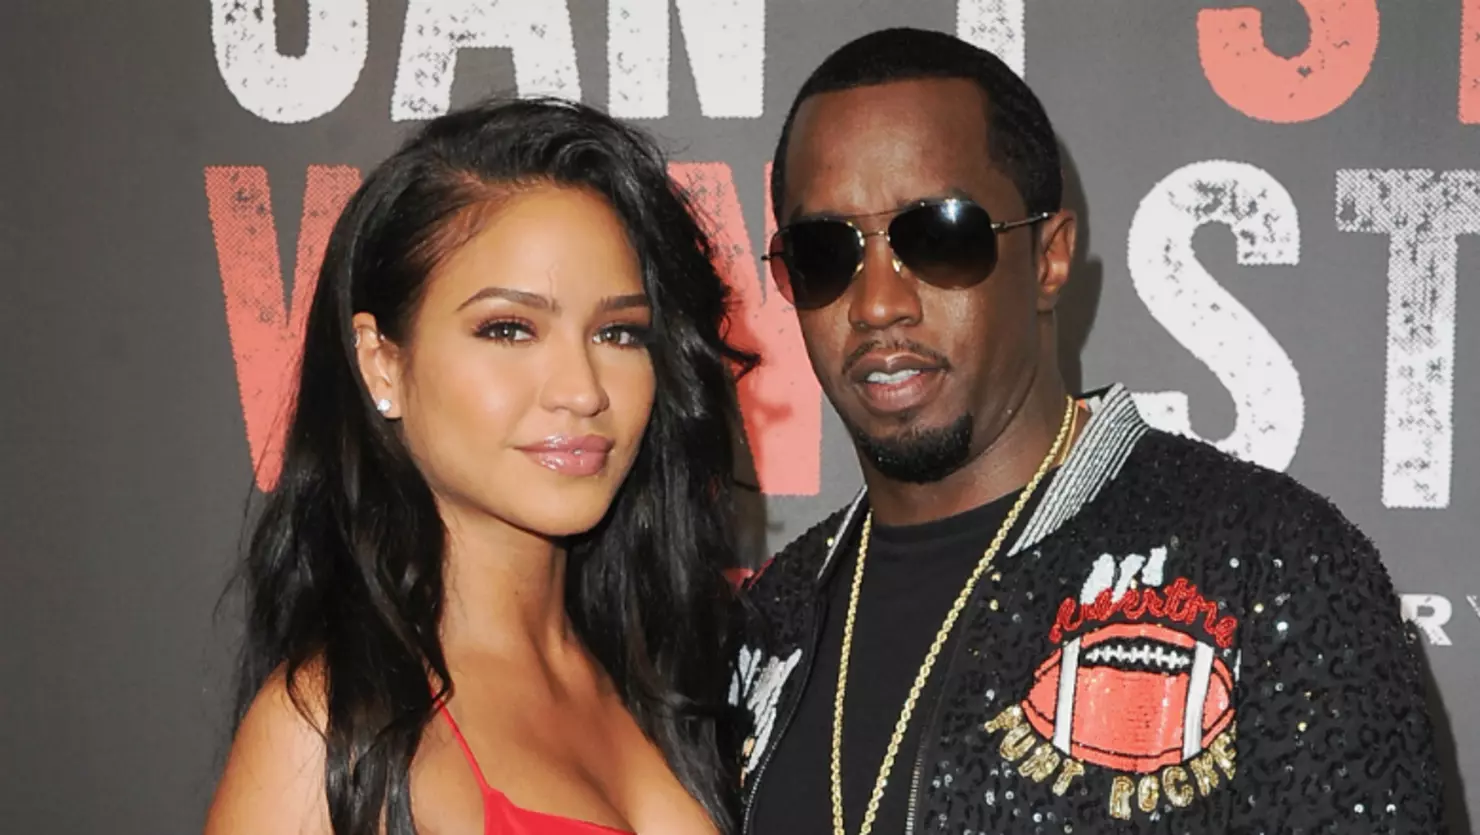 Diddy’s ex Cassie accuses him of rape and abuse